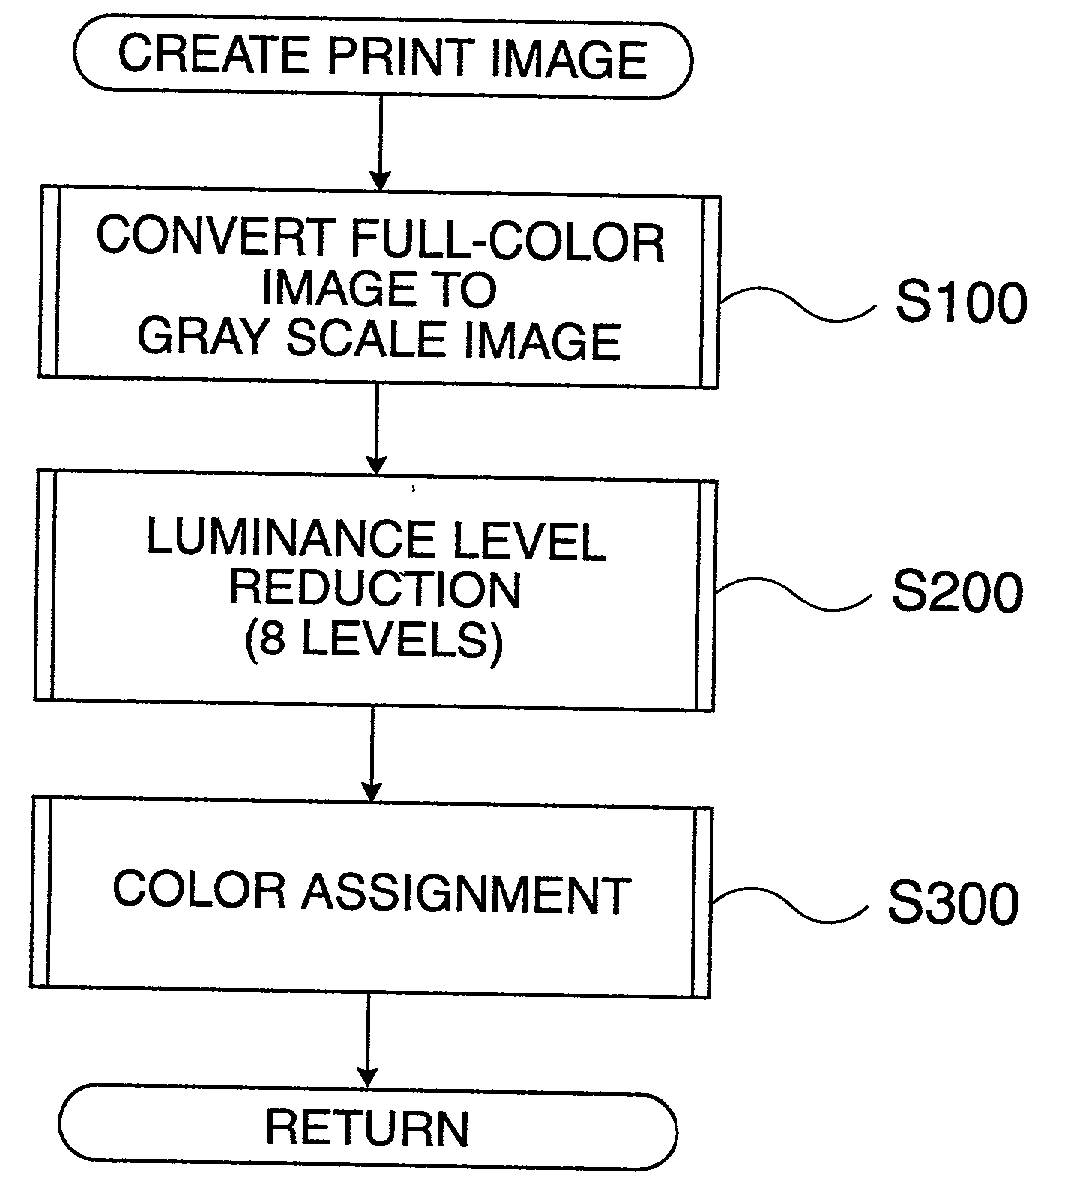 System and method for processing image data, computer program for performing the method and data storage medium carrying the program